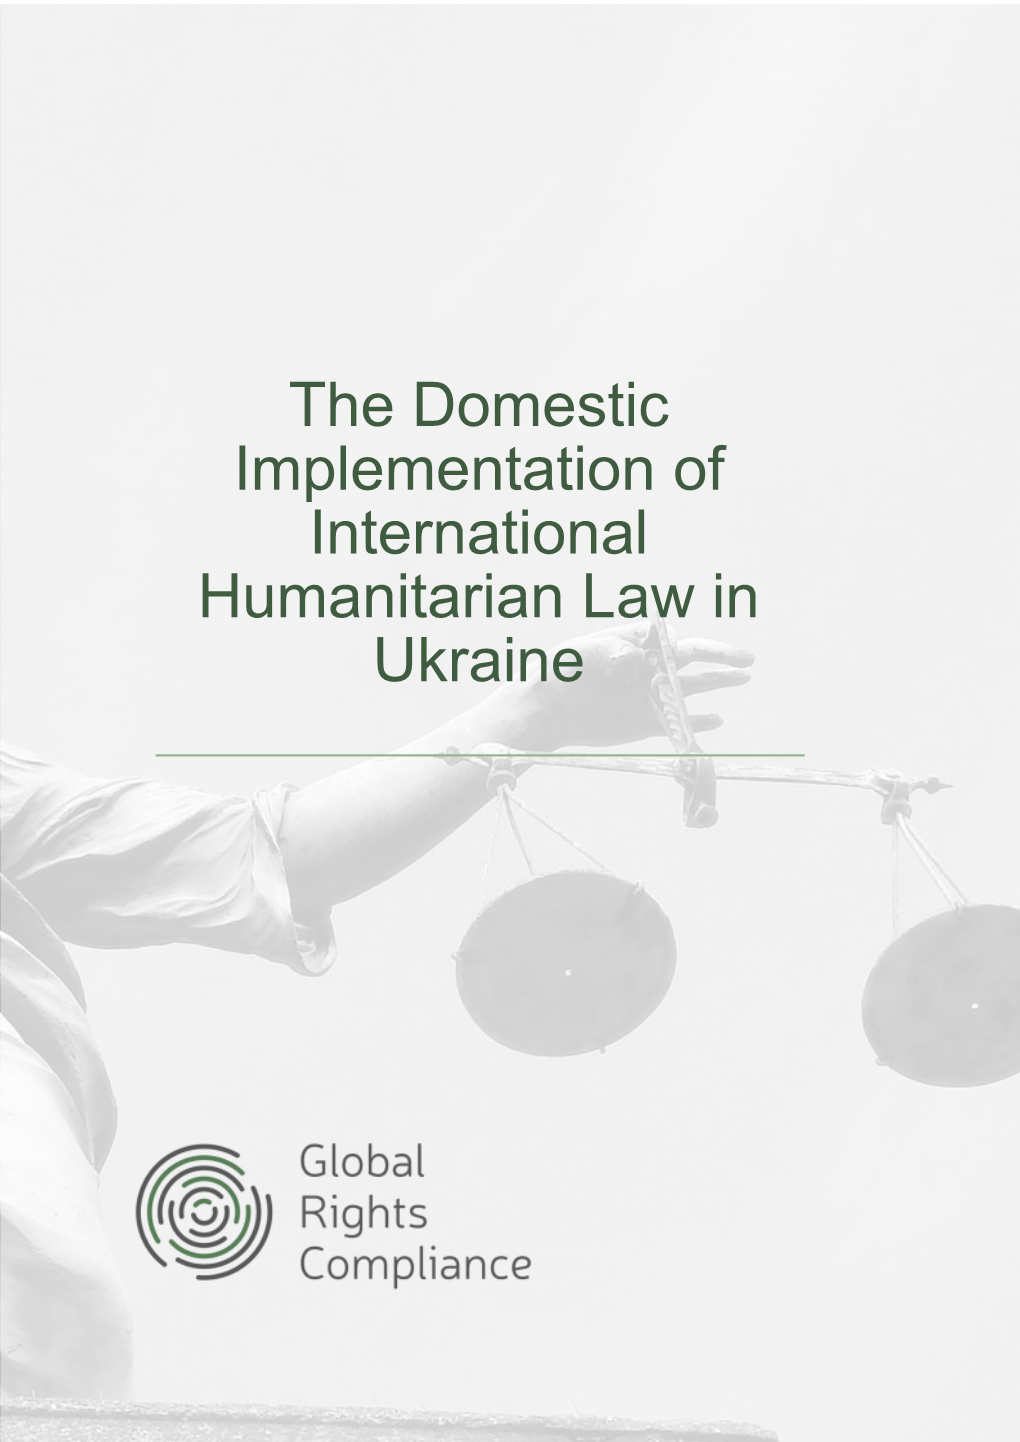 The Domestic Implementation of International Humanitarian Law in Ukraine